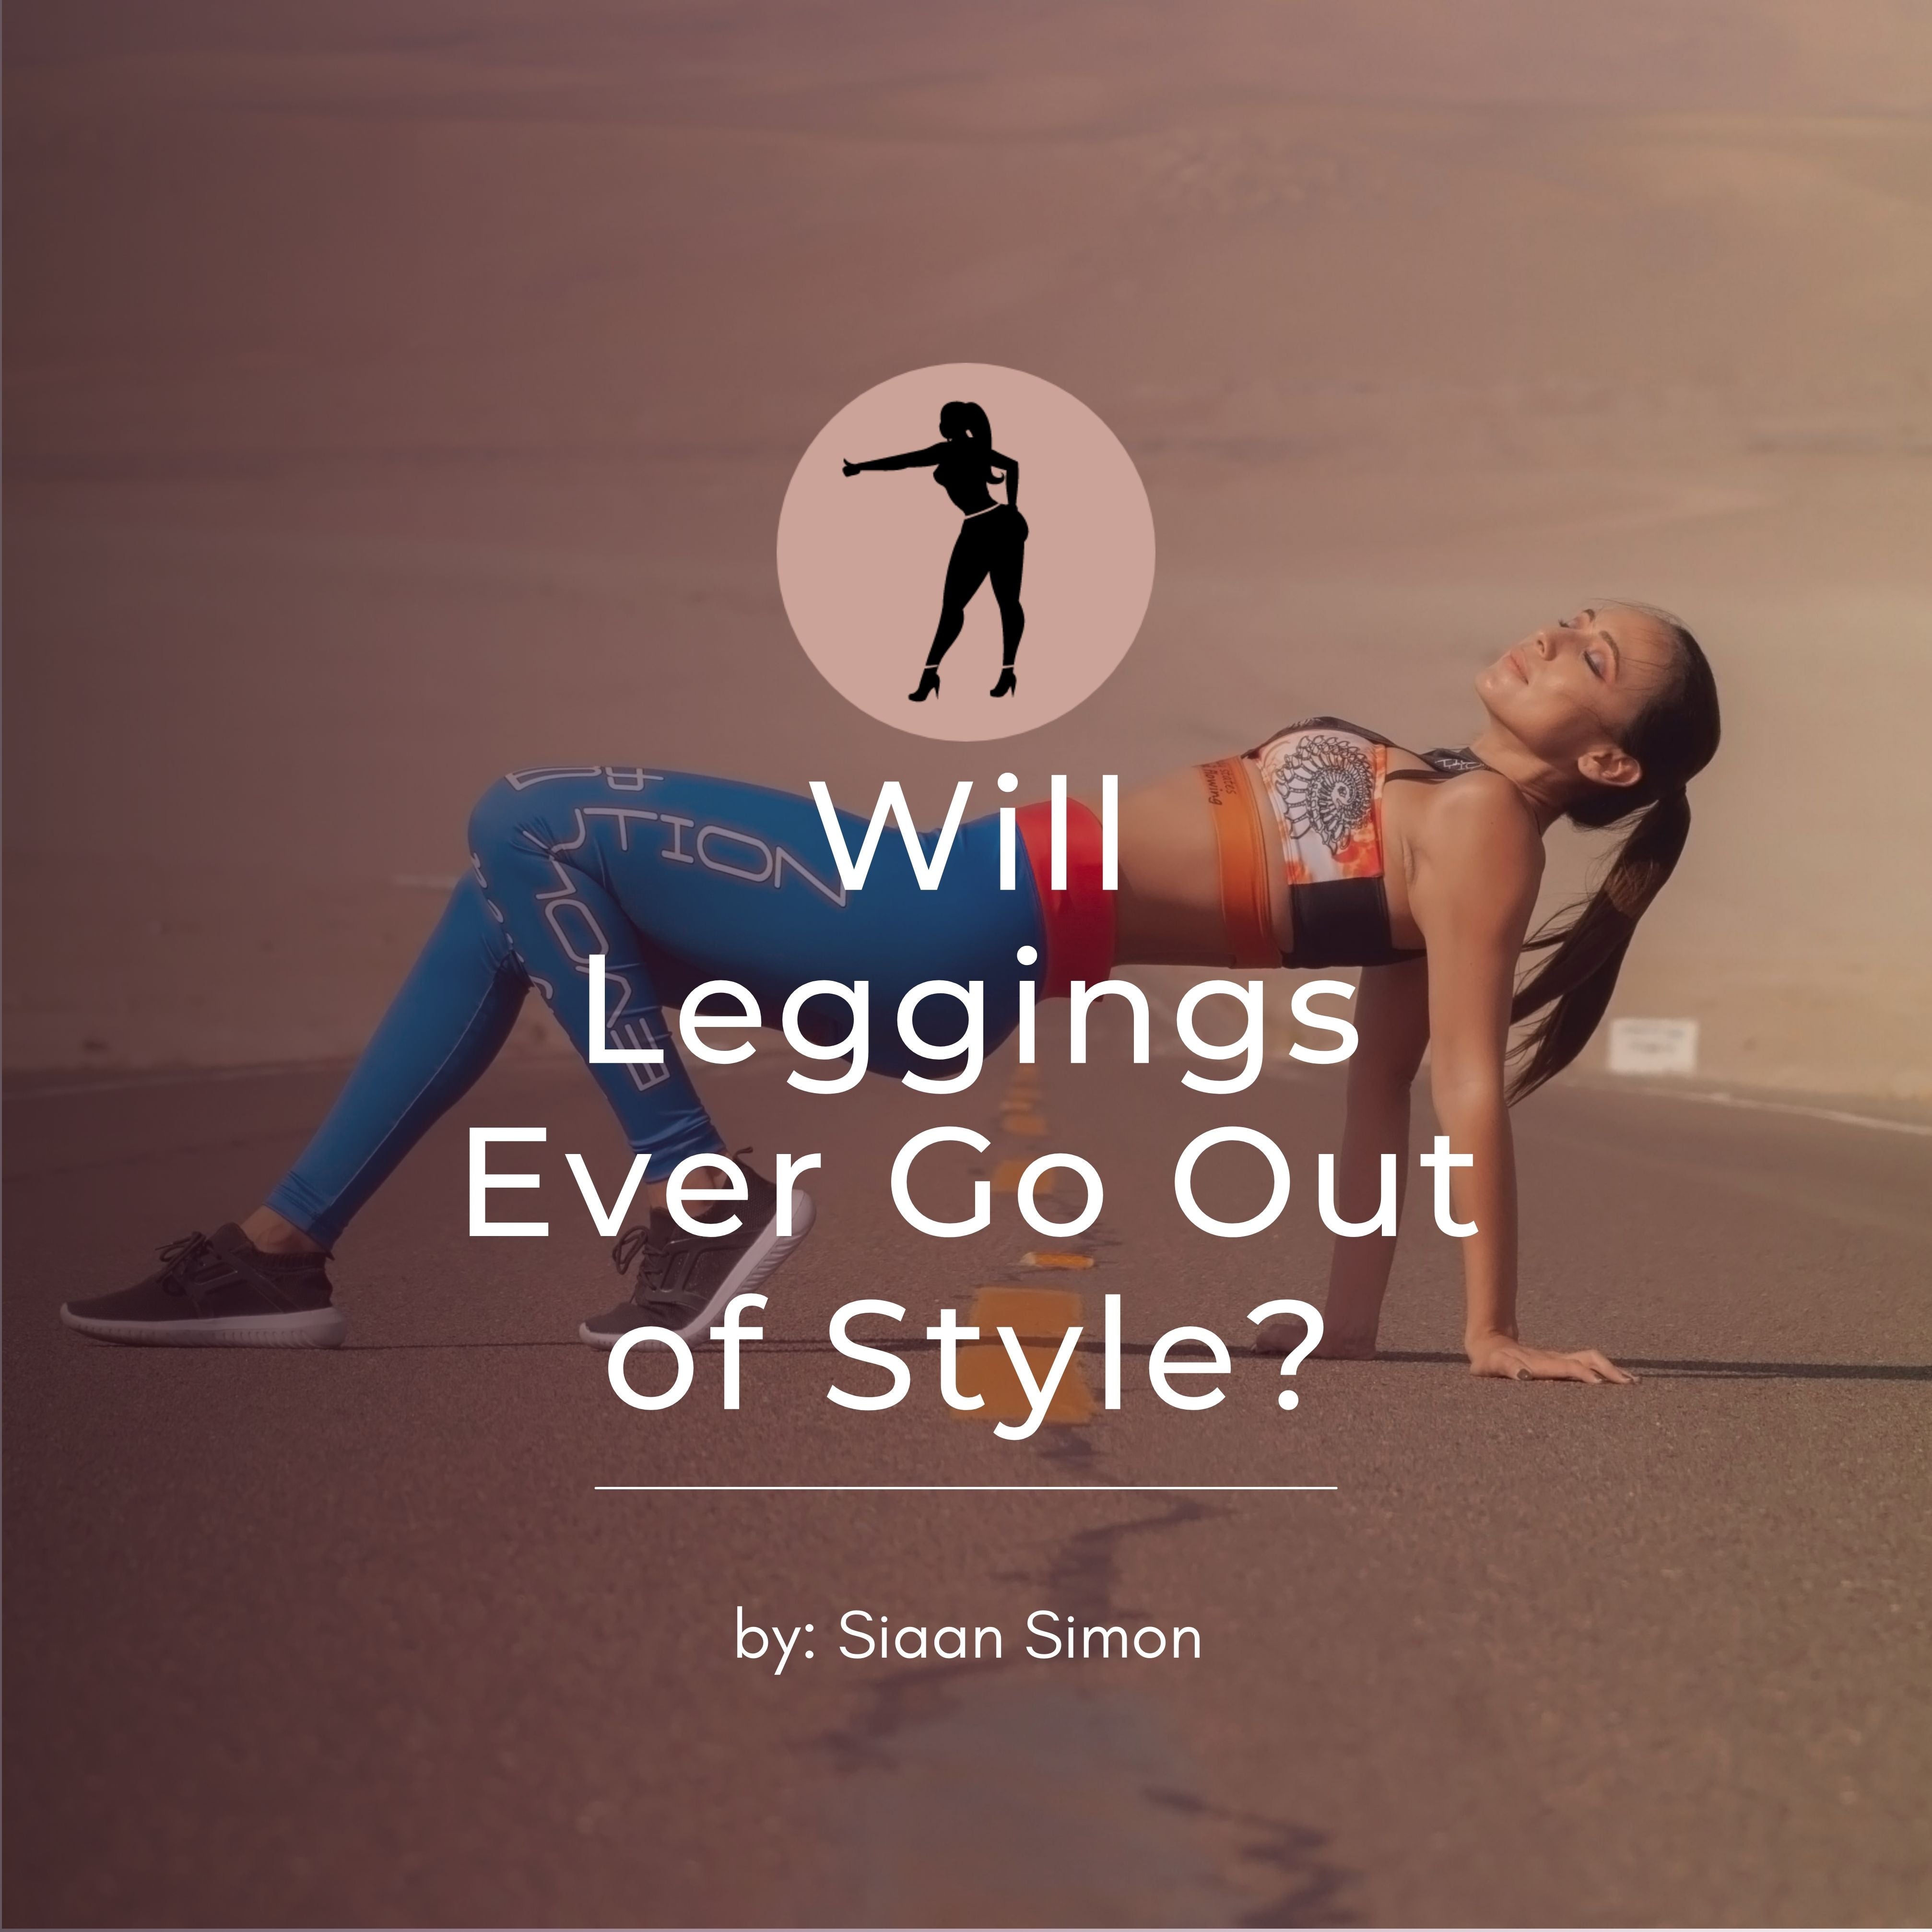 Will Leggings Ever Go Out of Style? – Sexxy Leggings